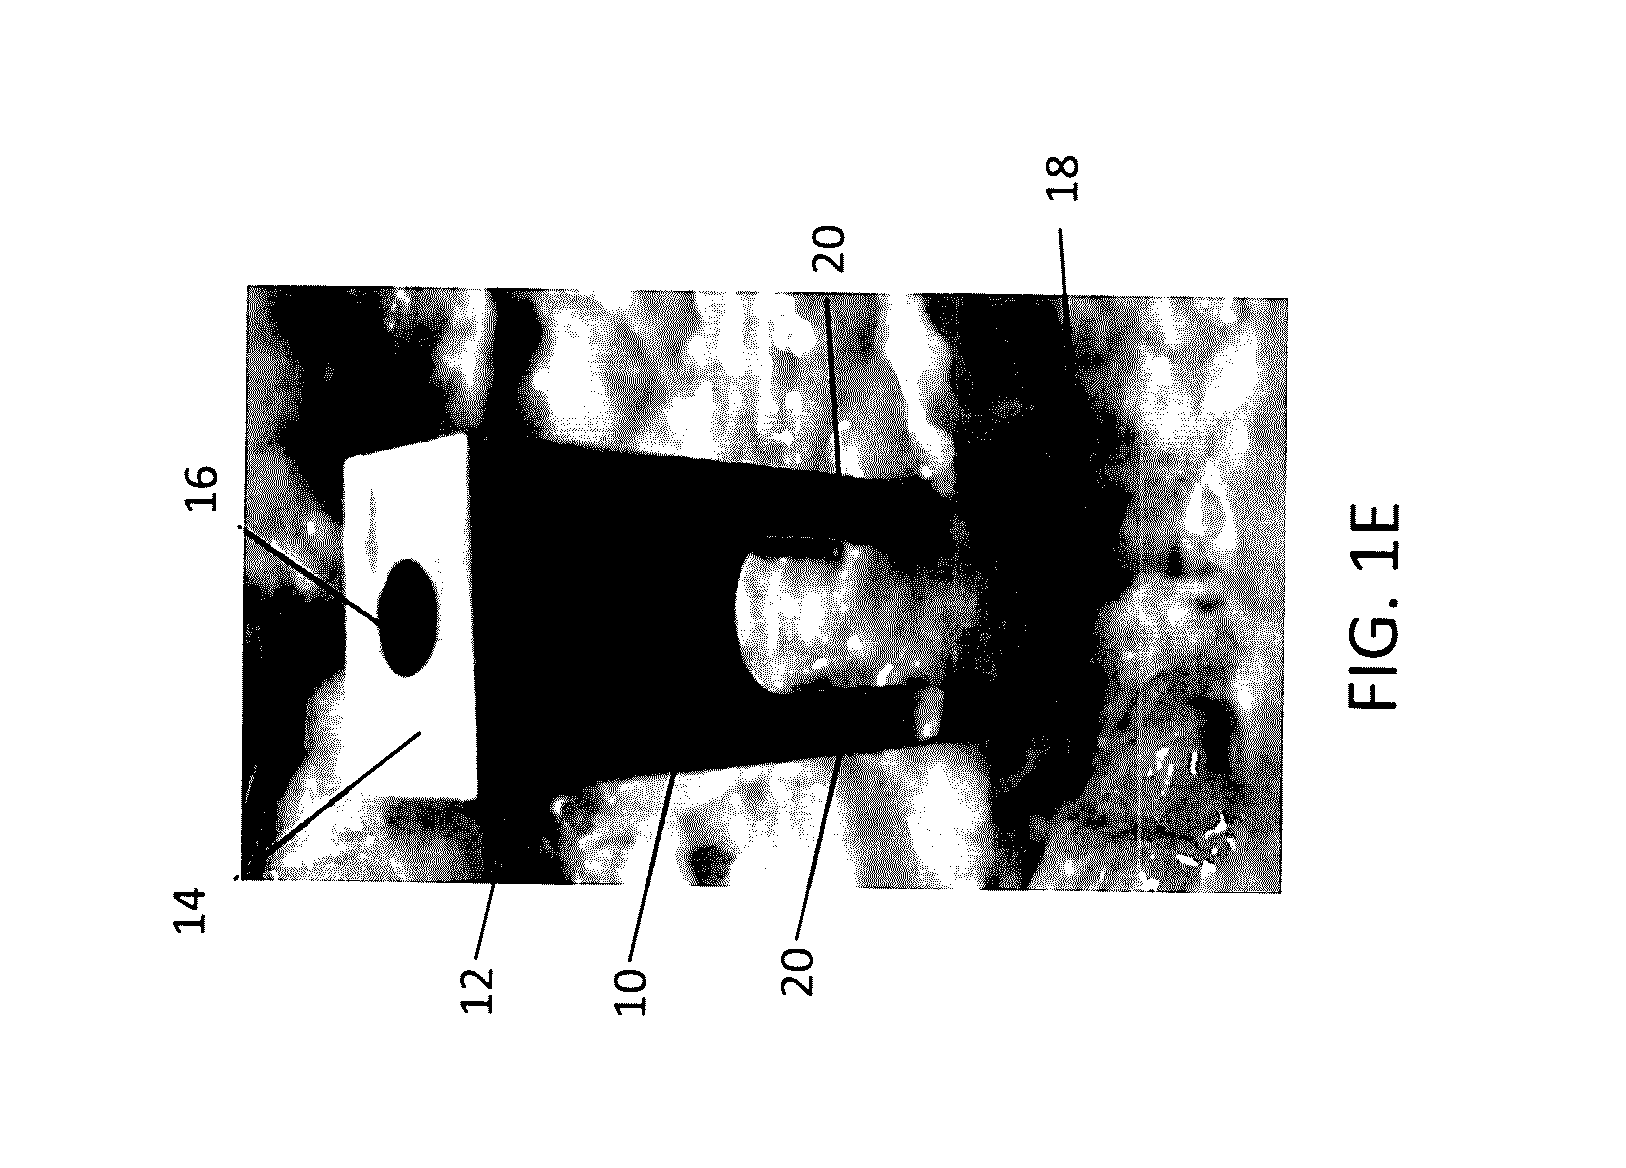 Devices and methods for temporary mounting of parts to bone